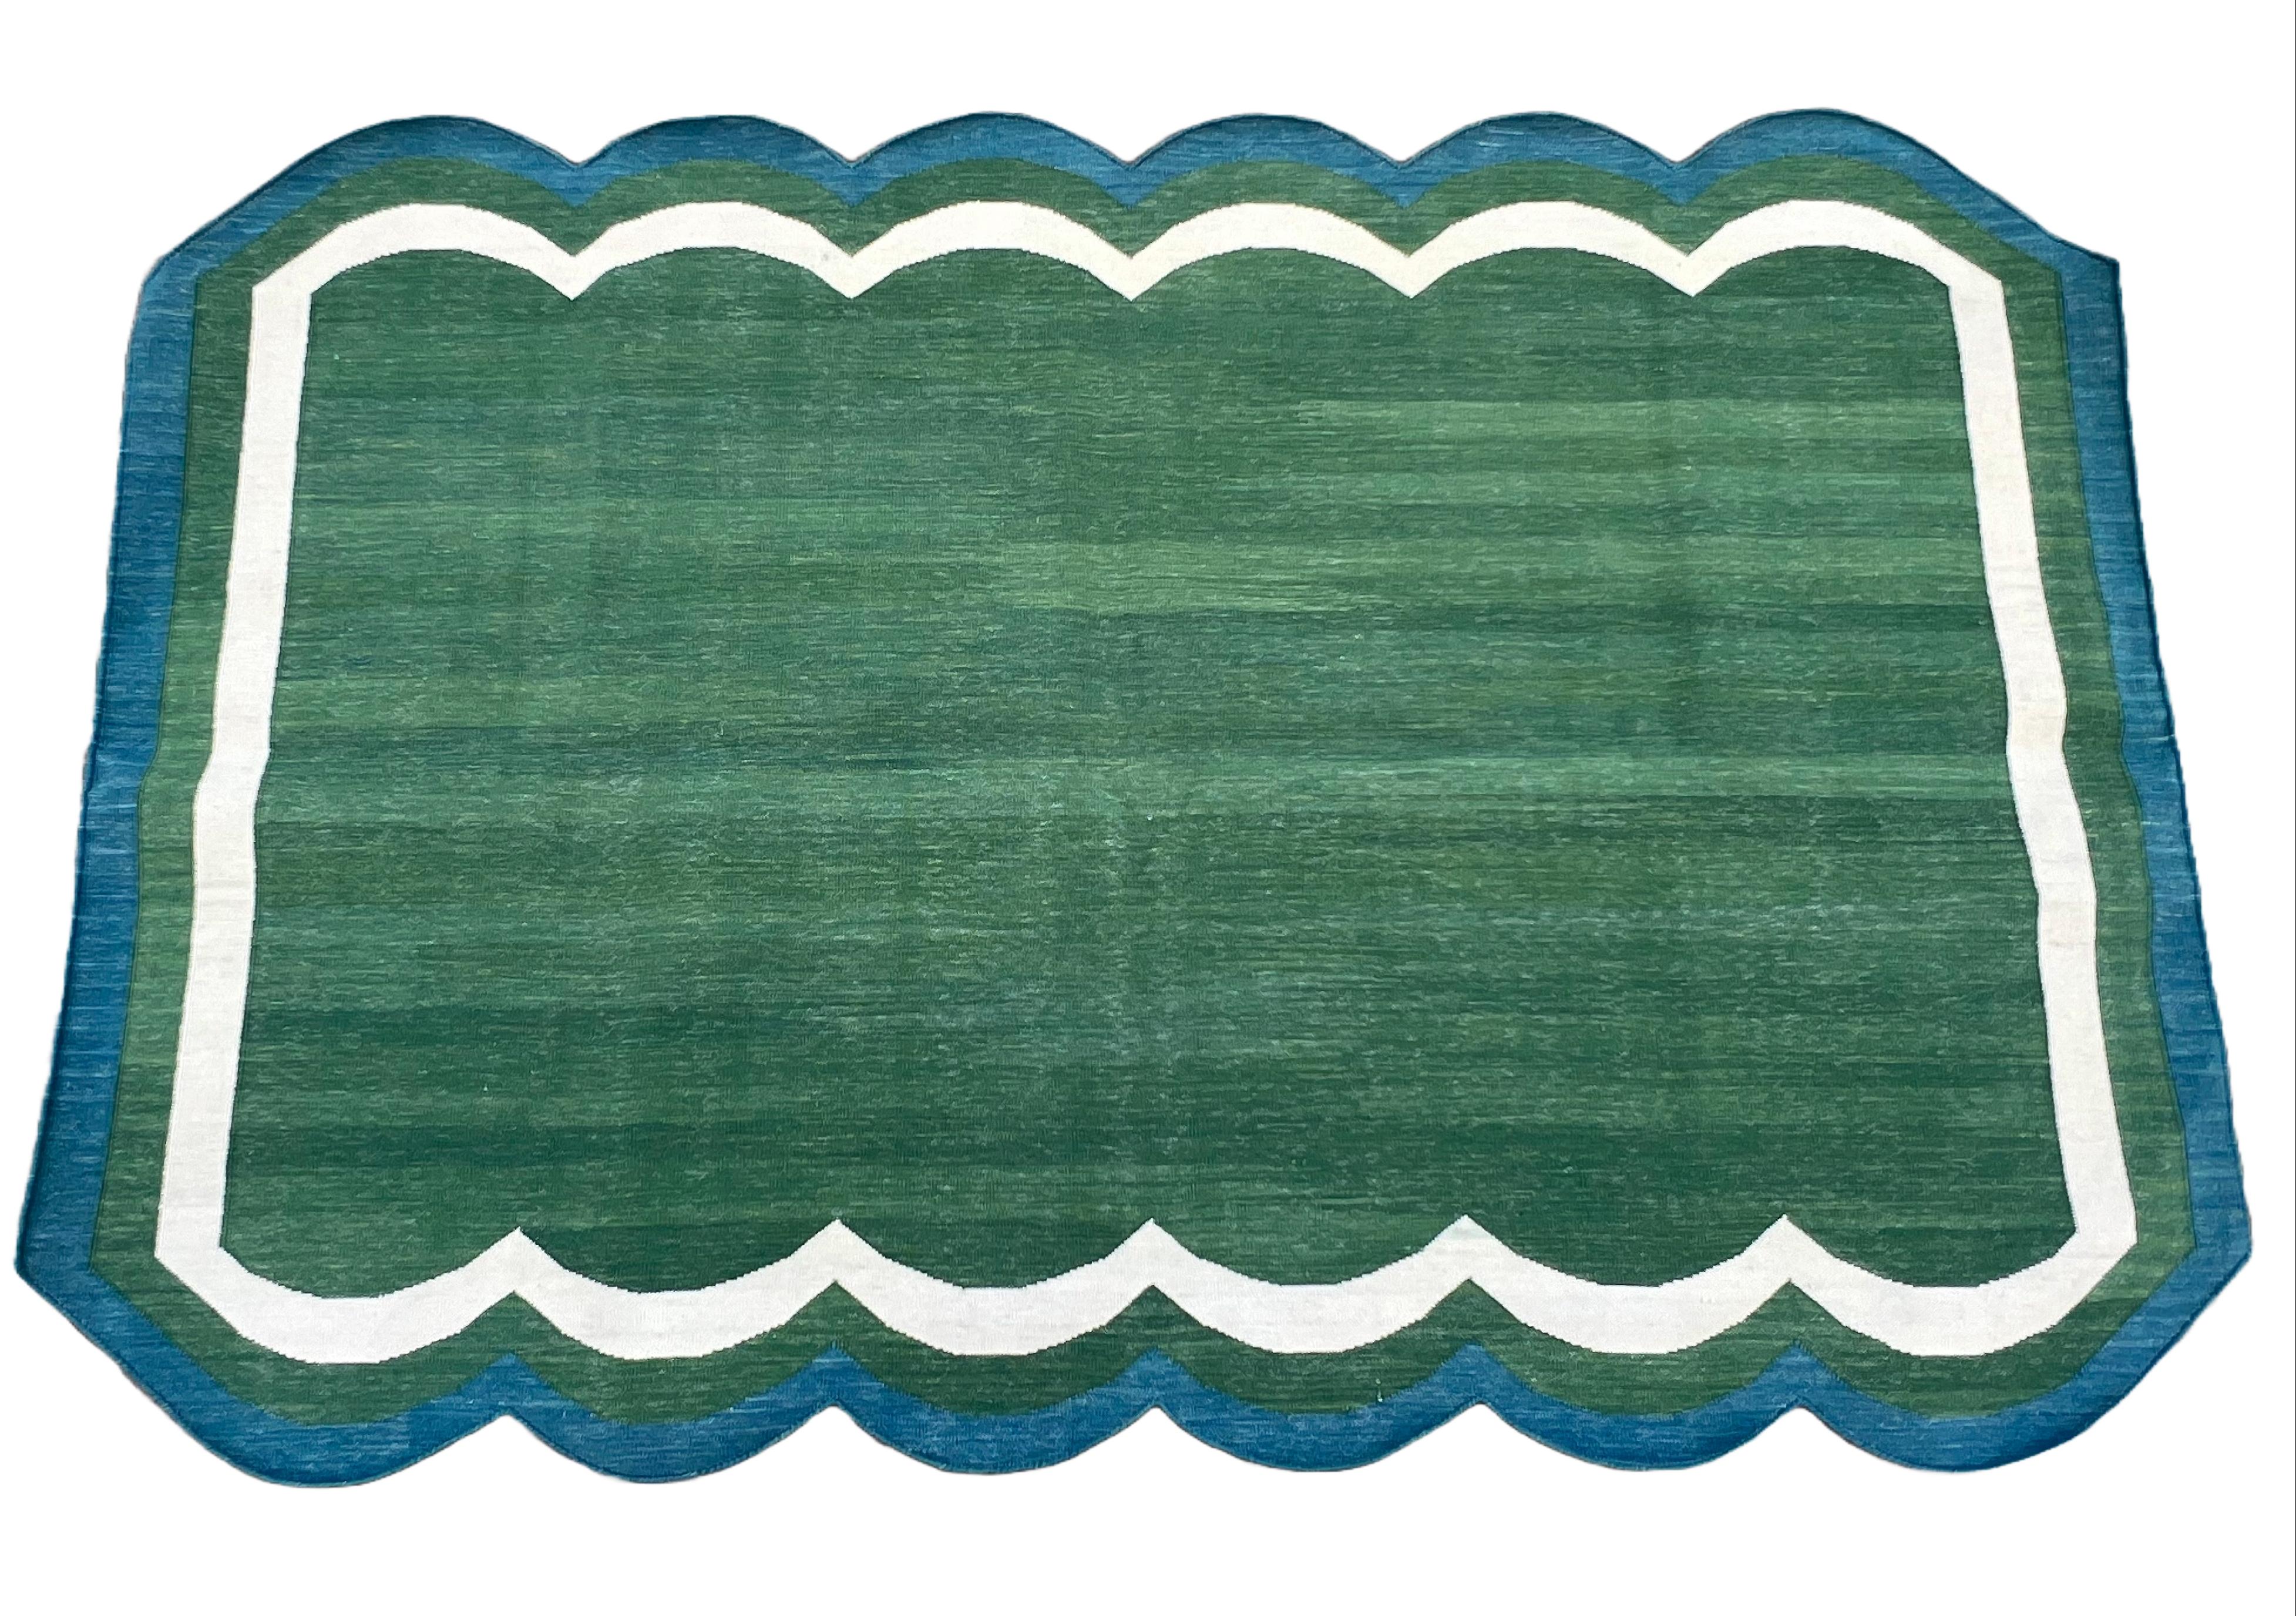 Mid-Century Modern Handmade Cotton Area Flat Weave Rug, Green & Teal Blue Scalloped Indian Dhurrie For Sale